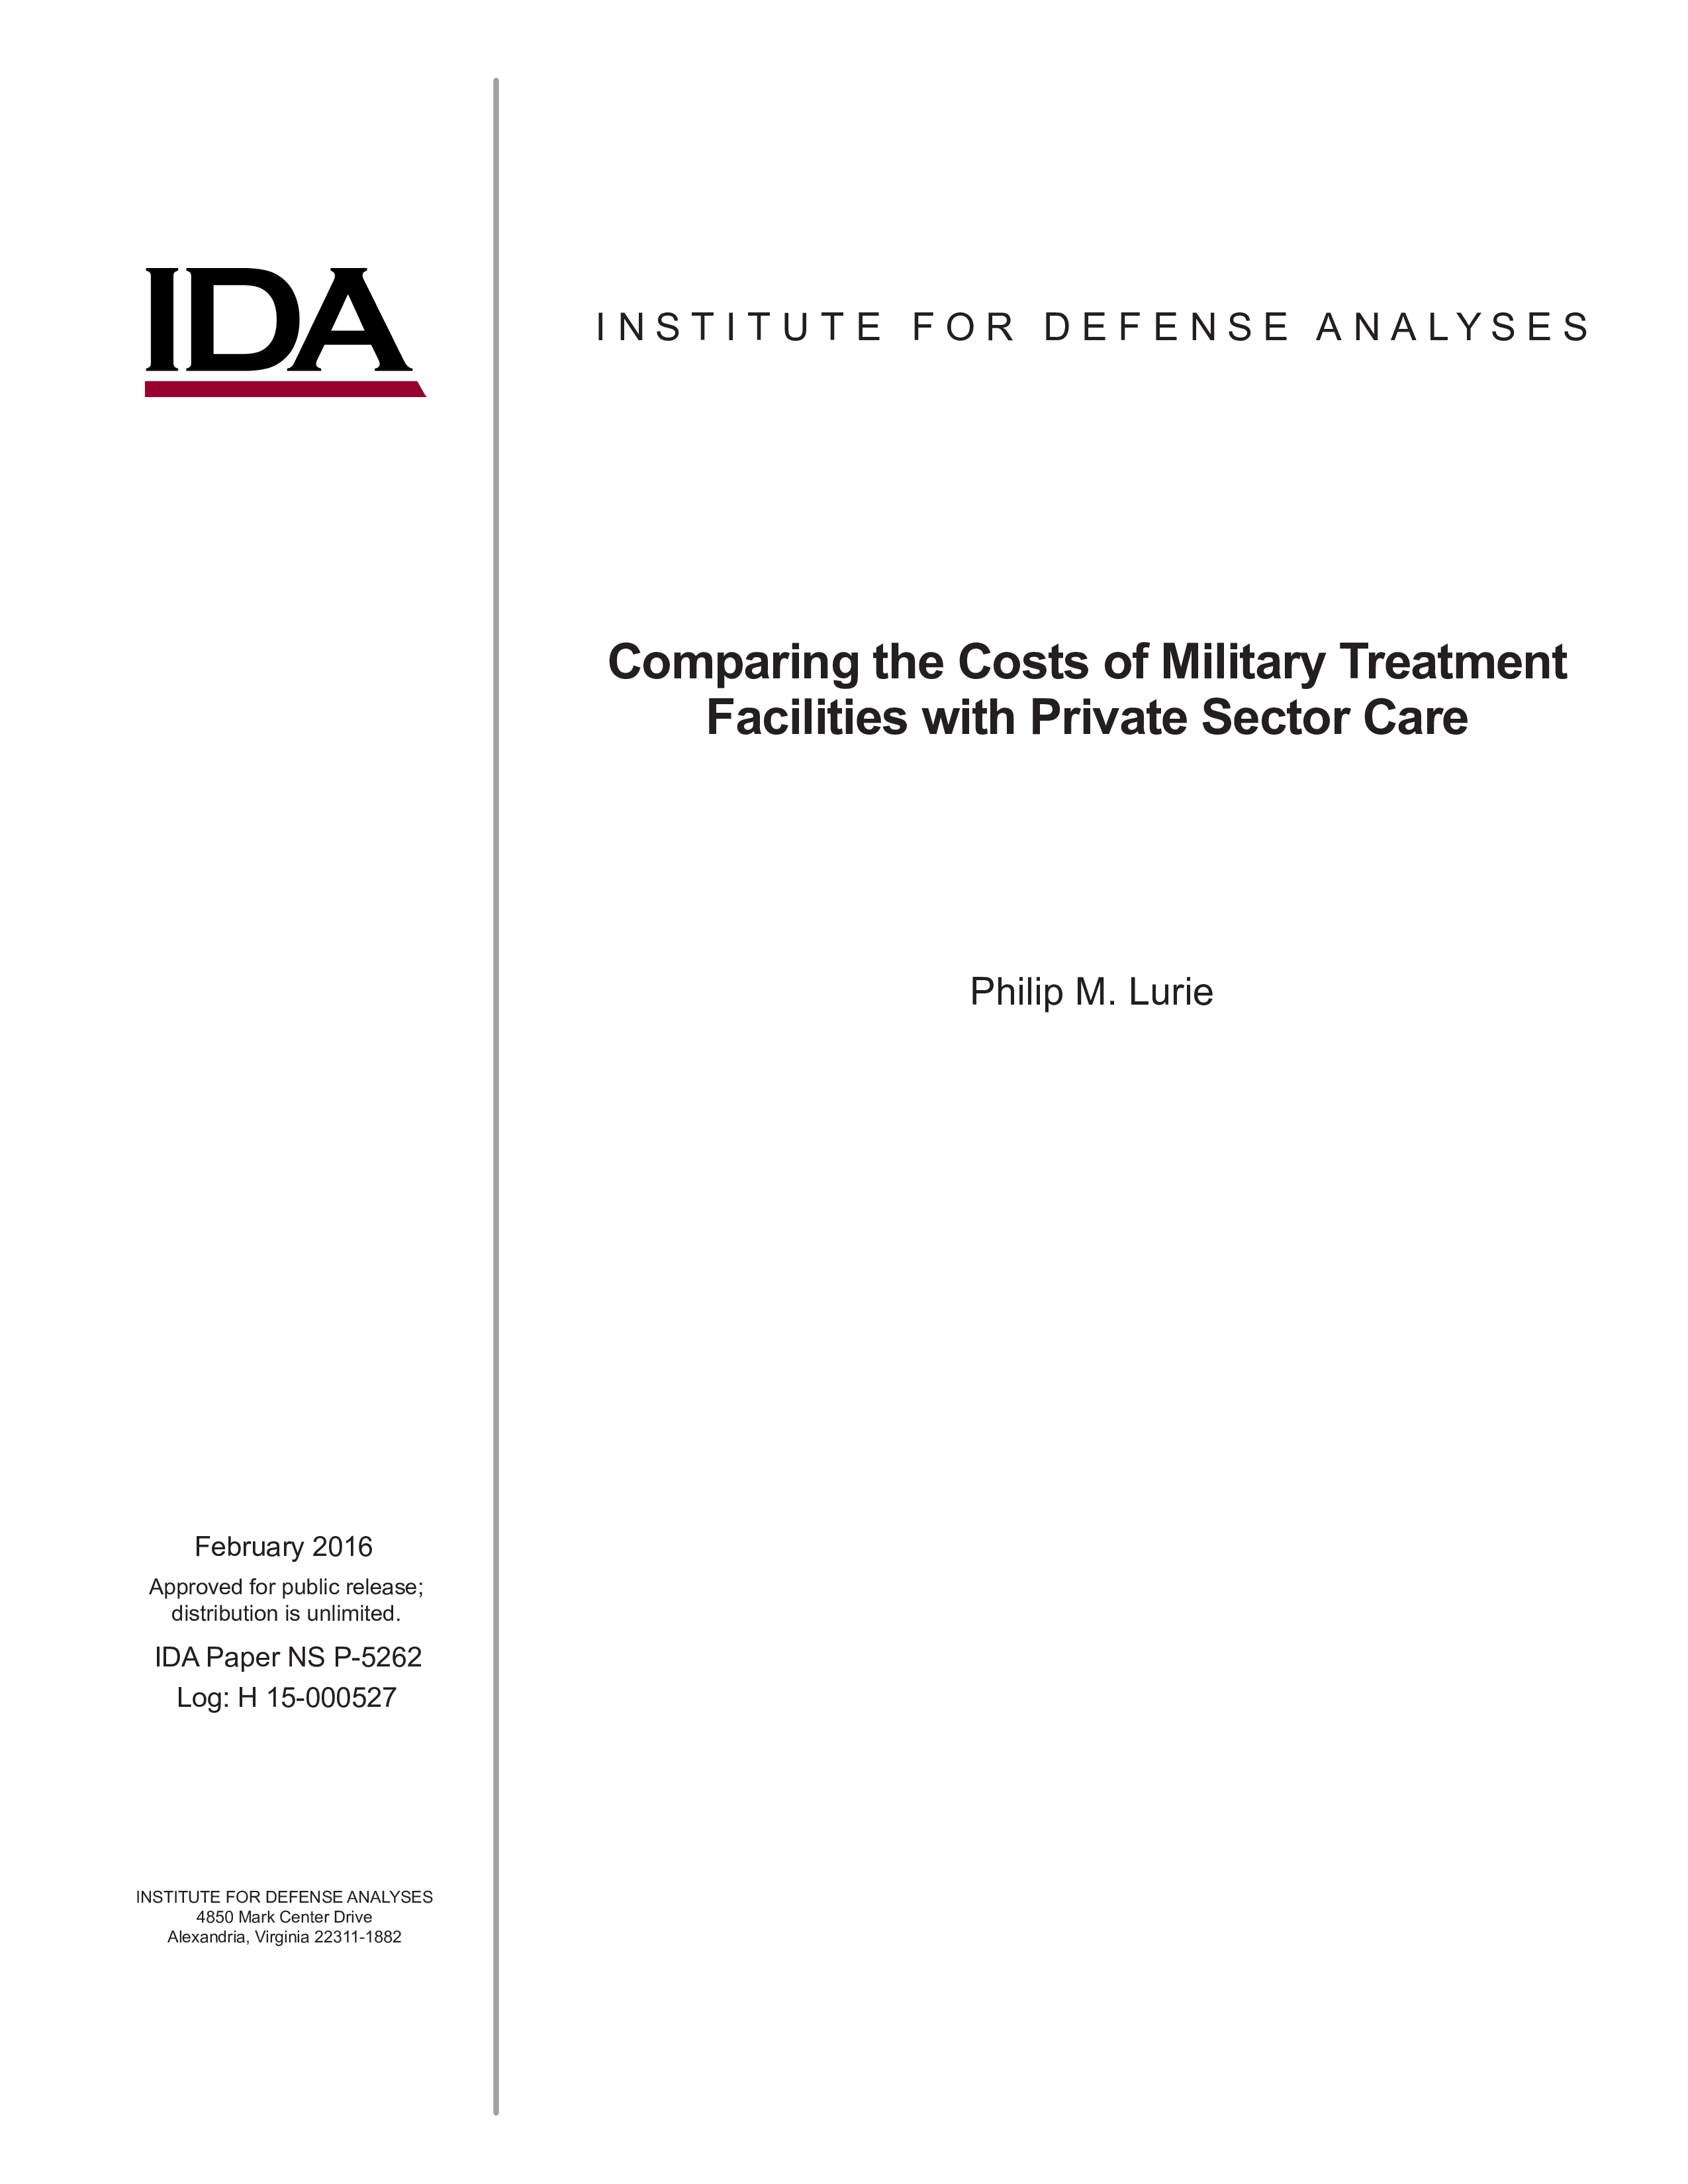 Comparing the Costs of Military Treatment Facilities with Private Sector Care